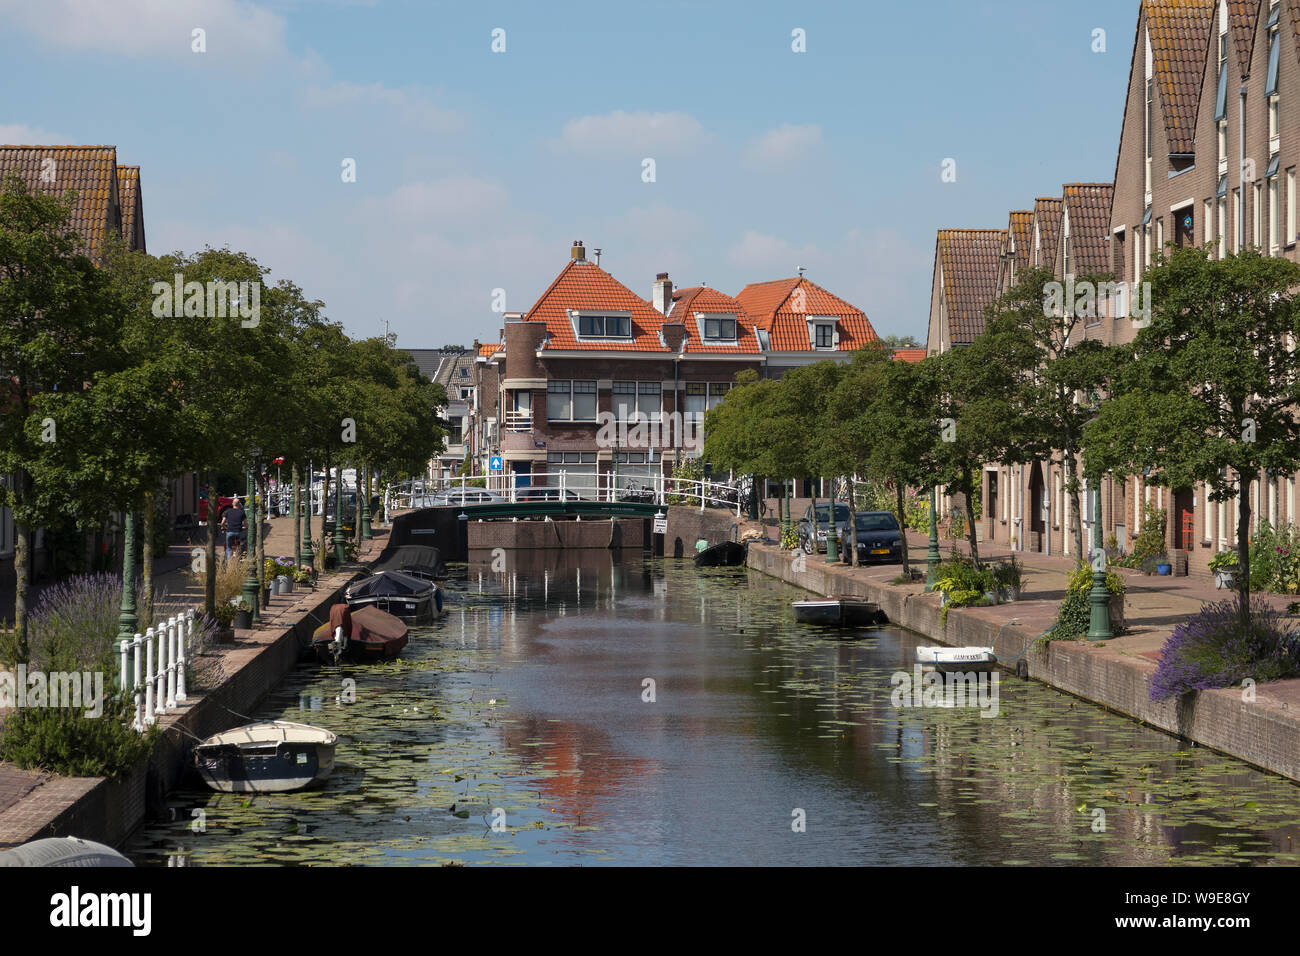 Leiden, Holland - July 05, 2019: View of the Oranje Gracht towards the Zuidsingel, canal with trees, plants and boats in summer Stock Photo